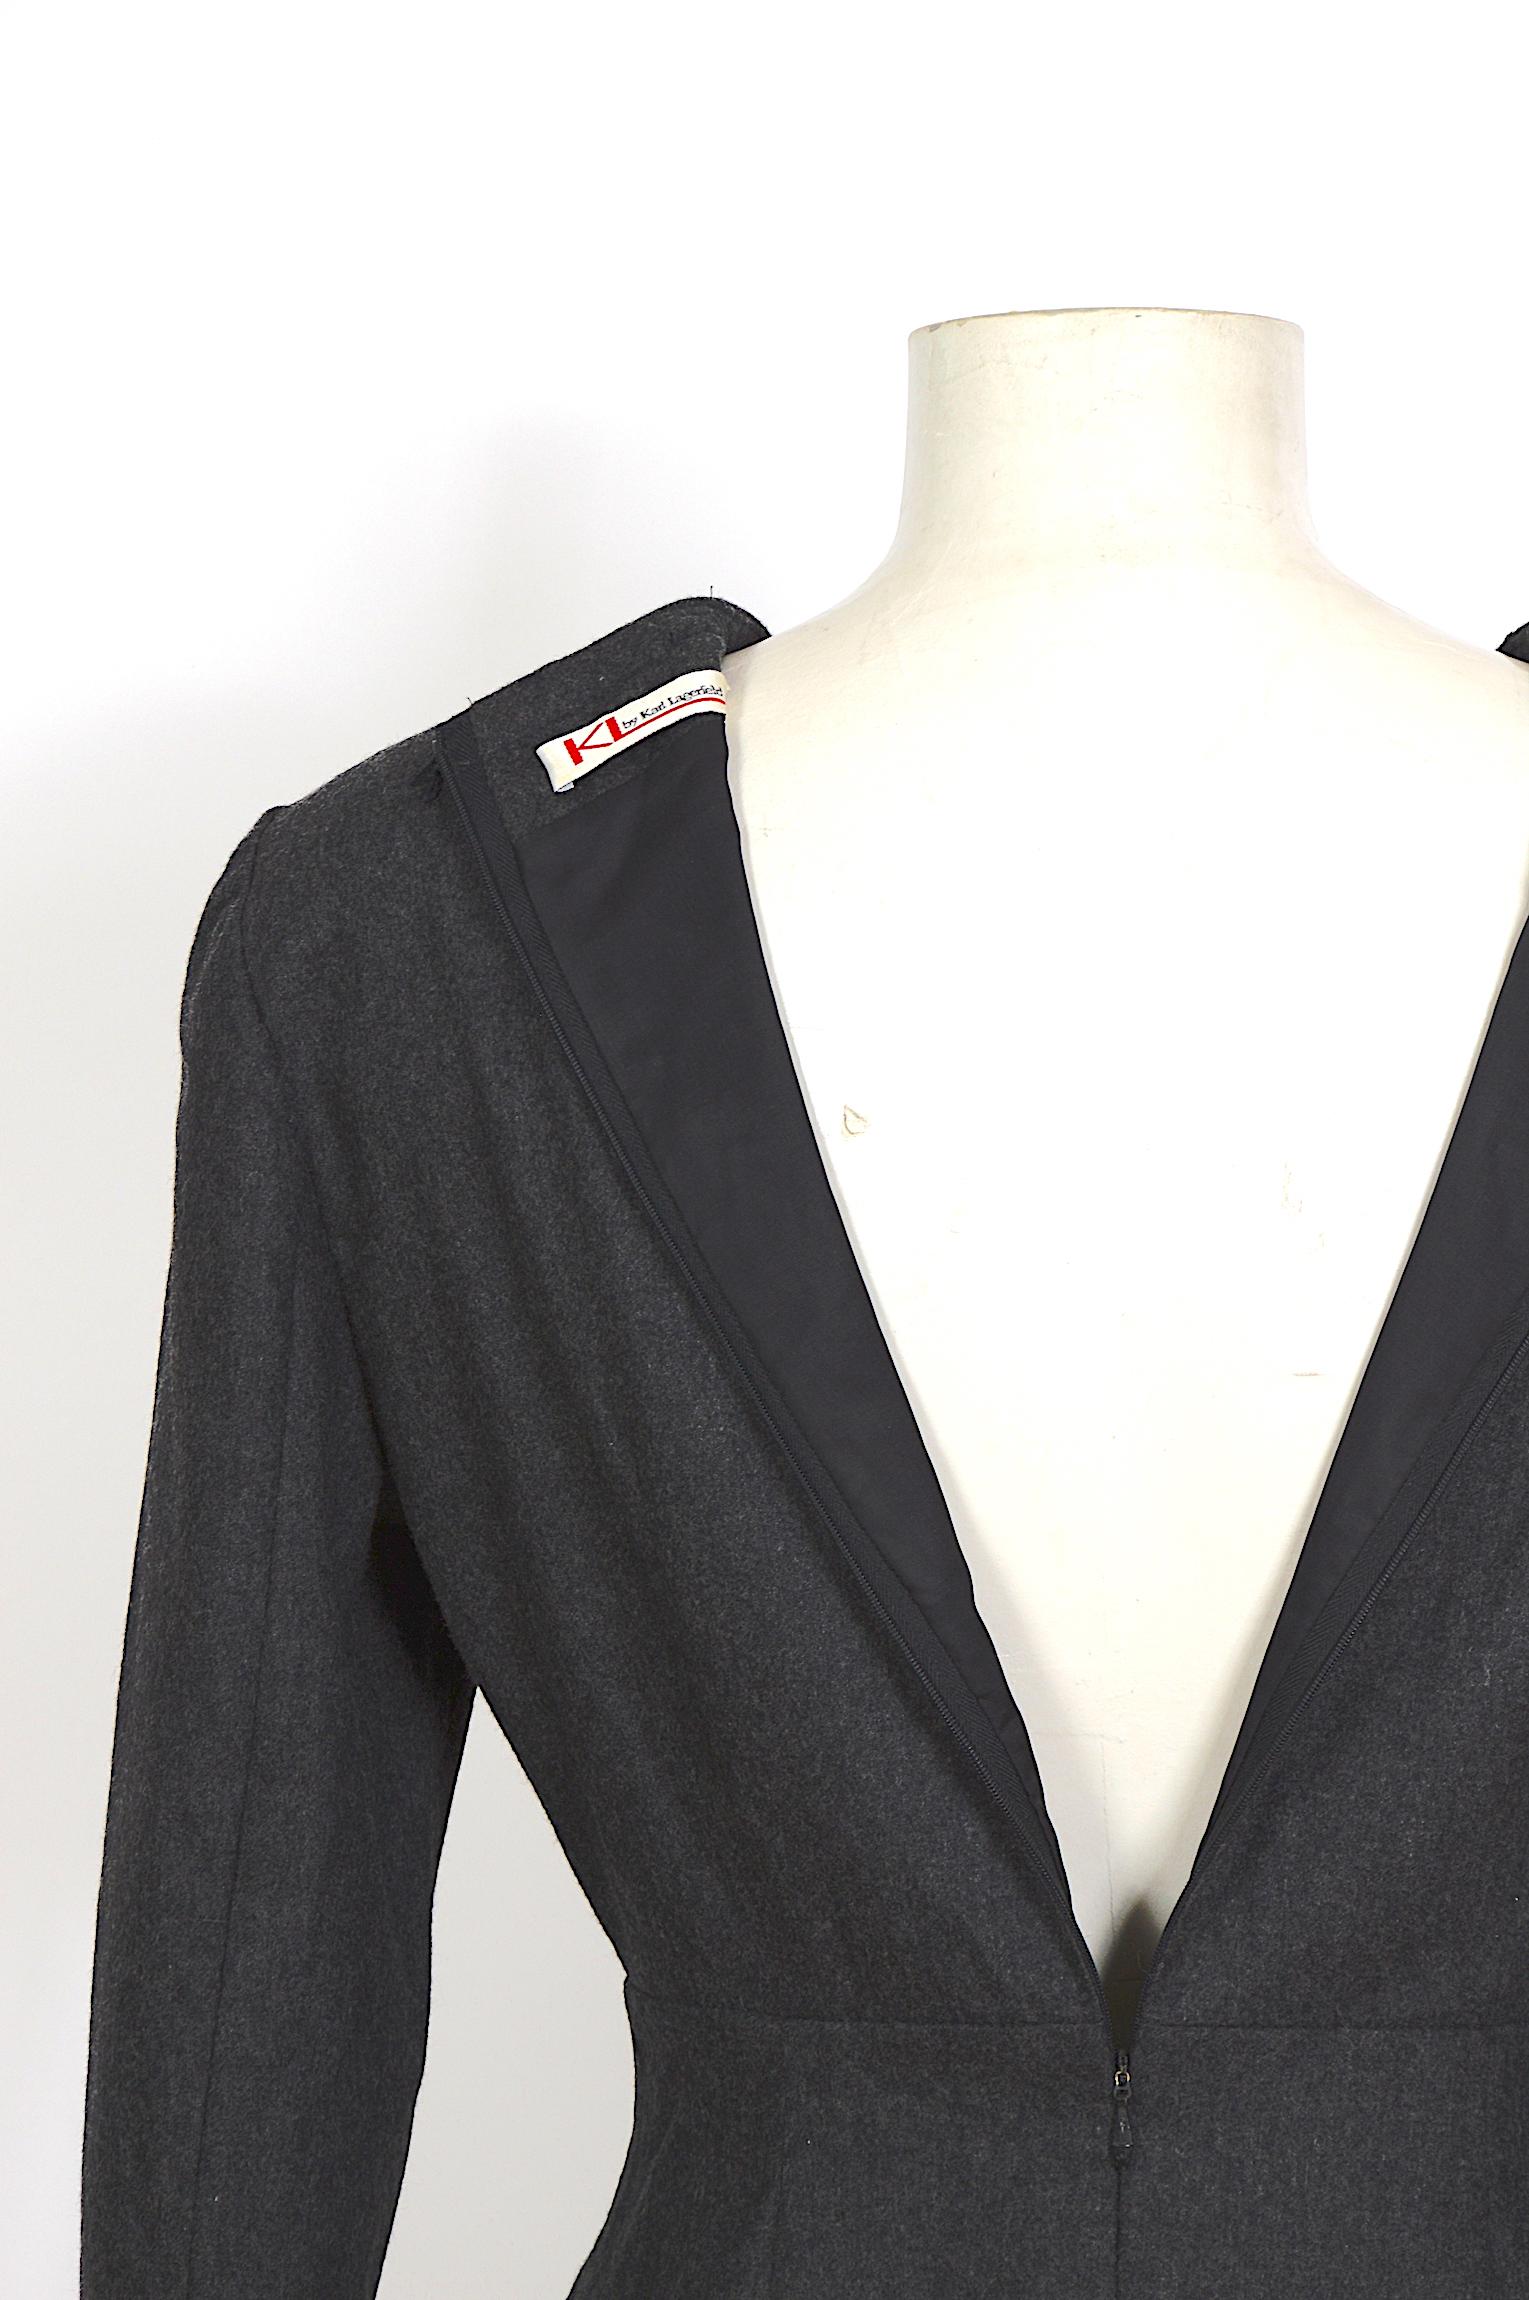 KL by Karl Lagerfeld 1980s grey cashmere & wool mix with KL logo buttons dress For Sale 1